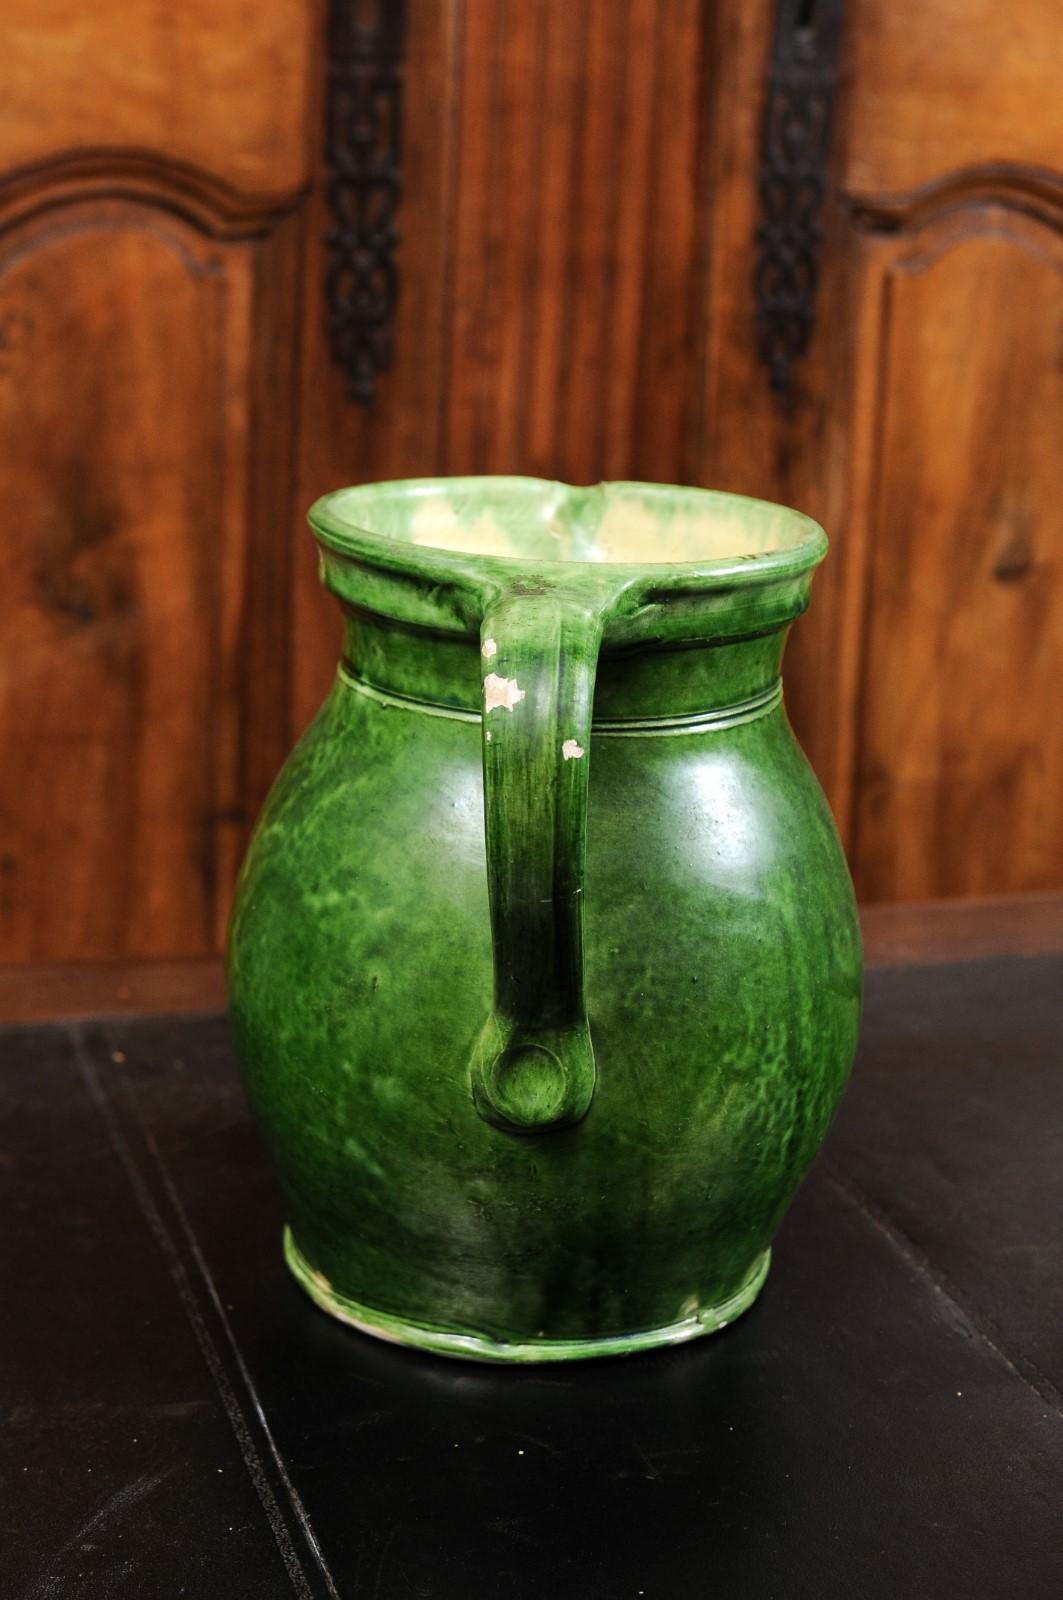 A French Provincial pitcher from the 19th century, with green glazed décor. Created in Southern France during the 19th century, this pottery pitcher features a green glazed body showcasing a back handle and front spout. Perfect to be used as a vase